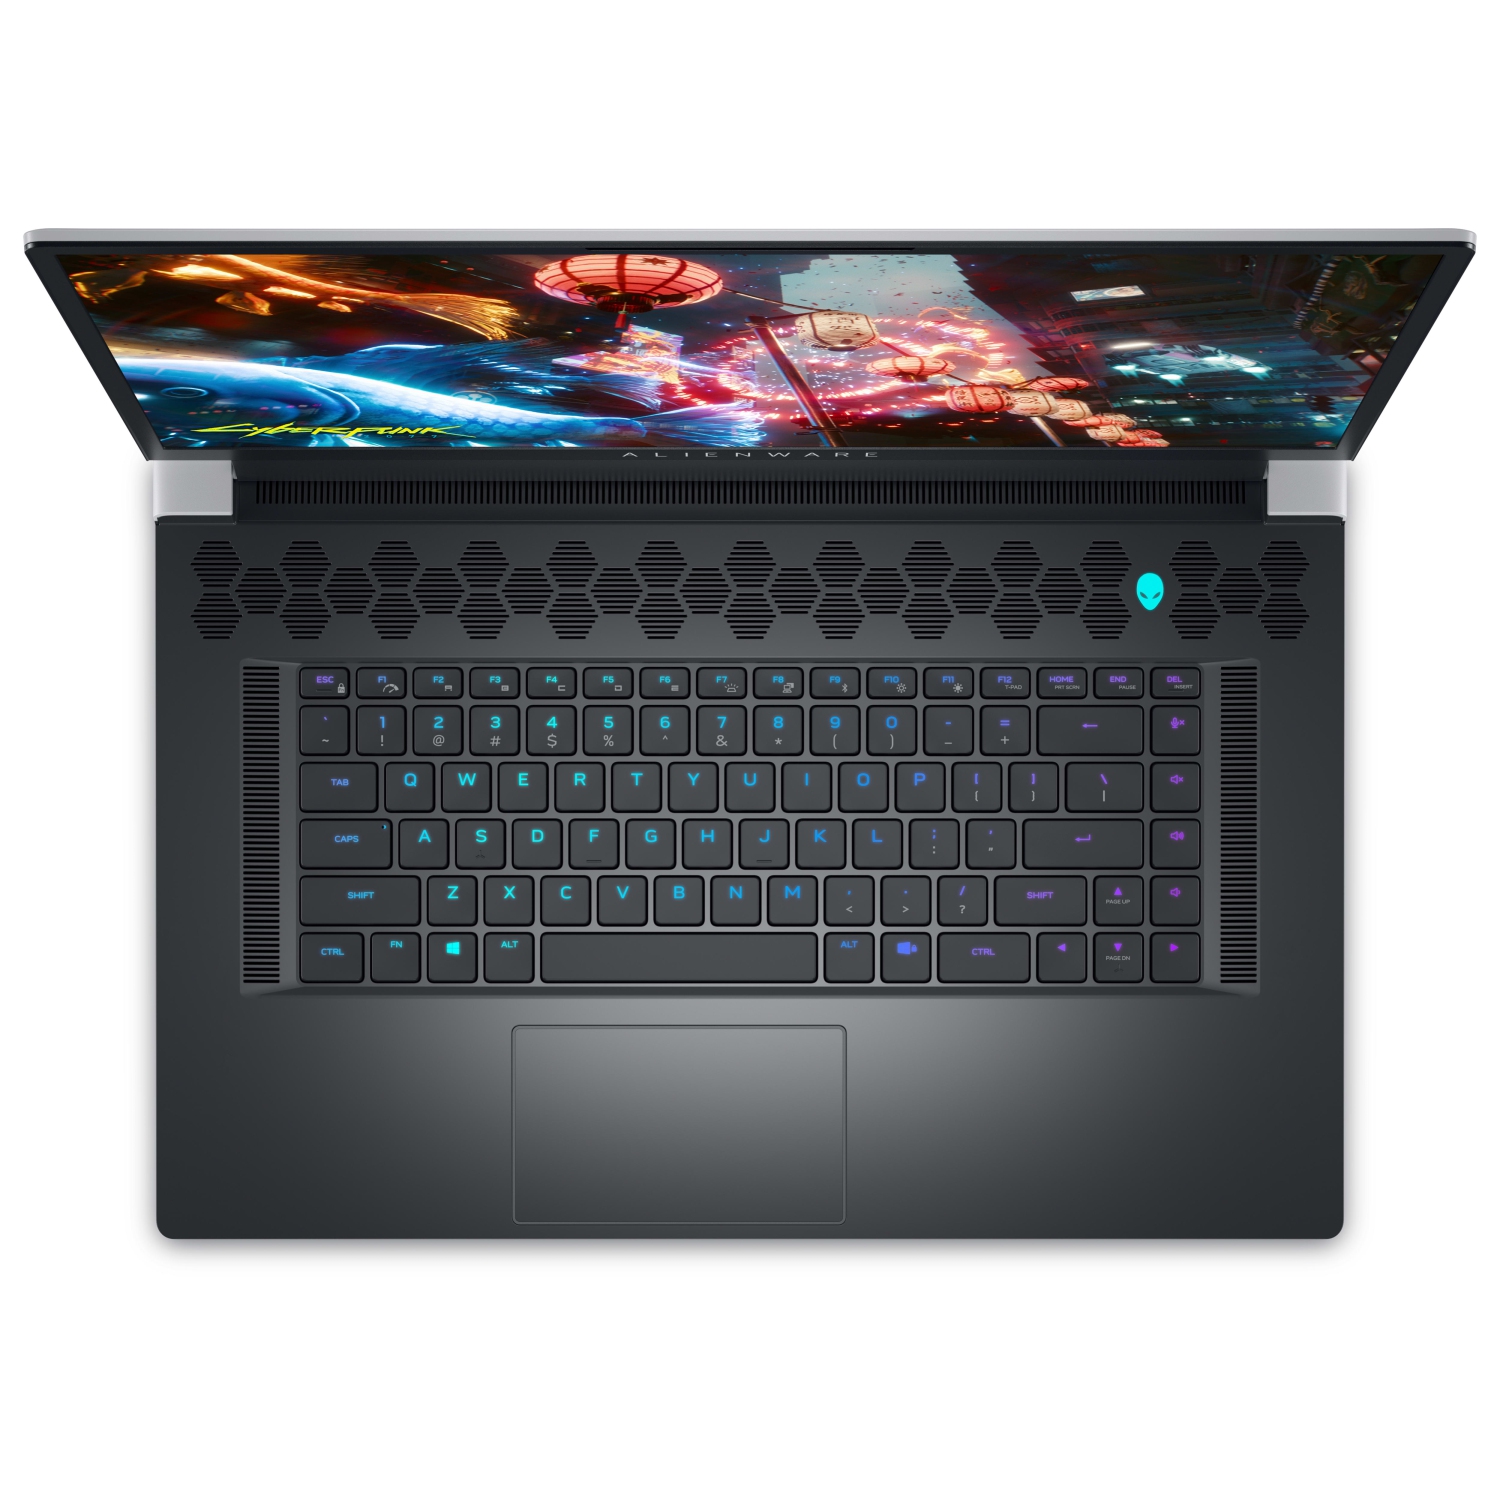 Refurbished (Excellent) – Dell Alienware X17 R2 Gaming Laptop (2022) | 17.3" FHD | Core i7 - 2TB SSD - 16GB RAM - RTX 3060 | 14 Cores @ 4.7 GHz - 12th Gen CPU - 6GB GDDR6